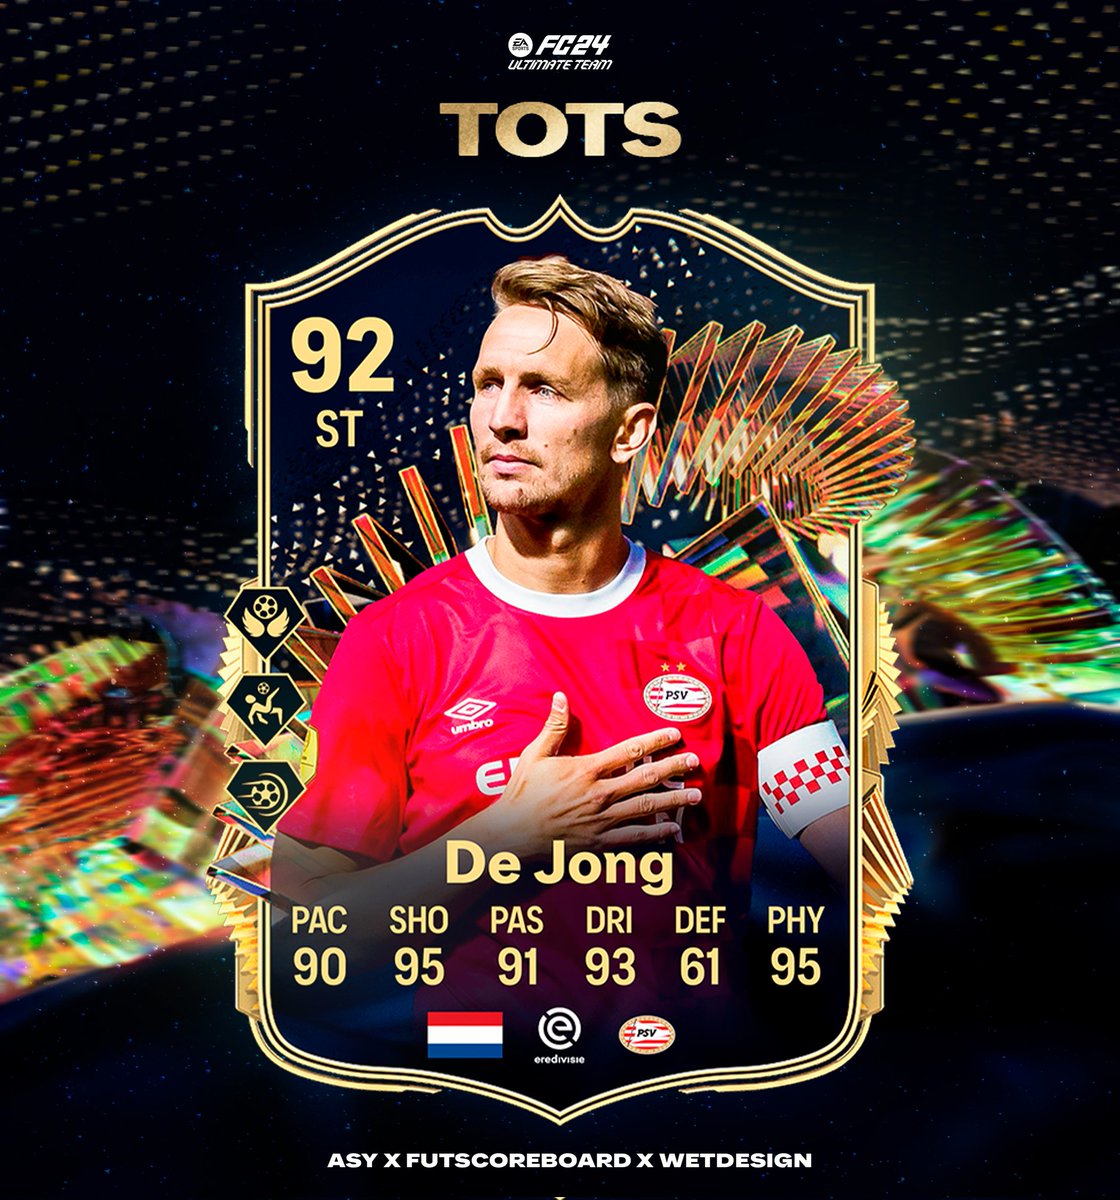 🚨 DE JONG is added to come in TOTS Mixed 4 team 🔥 Official Playstyles & Stats ✅️ Follow @AsyFutTrader, @Fut_scoreboard & @WetDesignFUT for more! 🤝